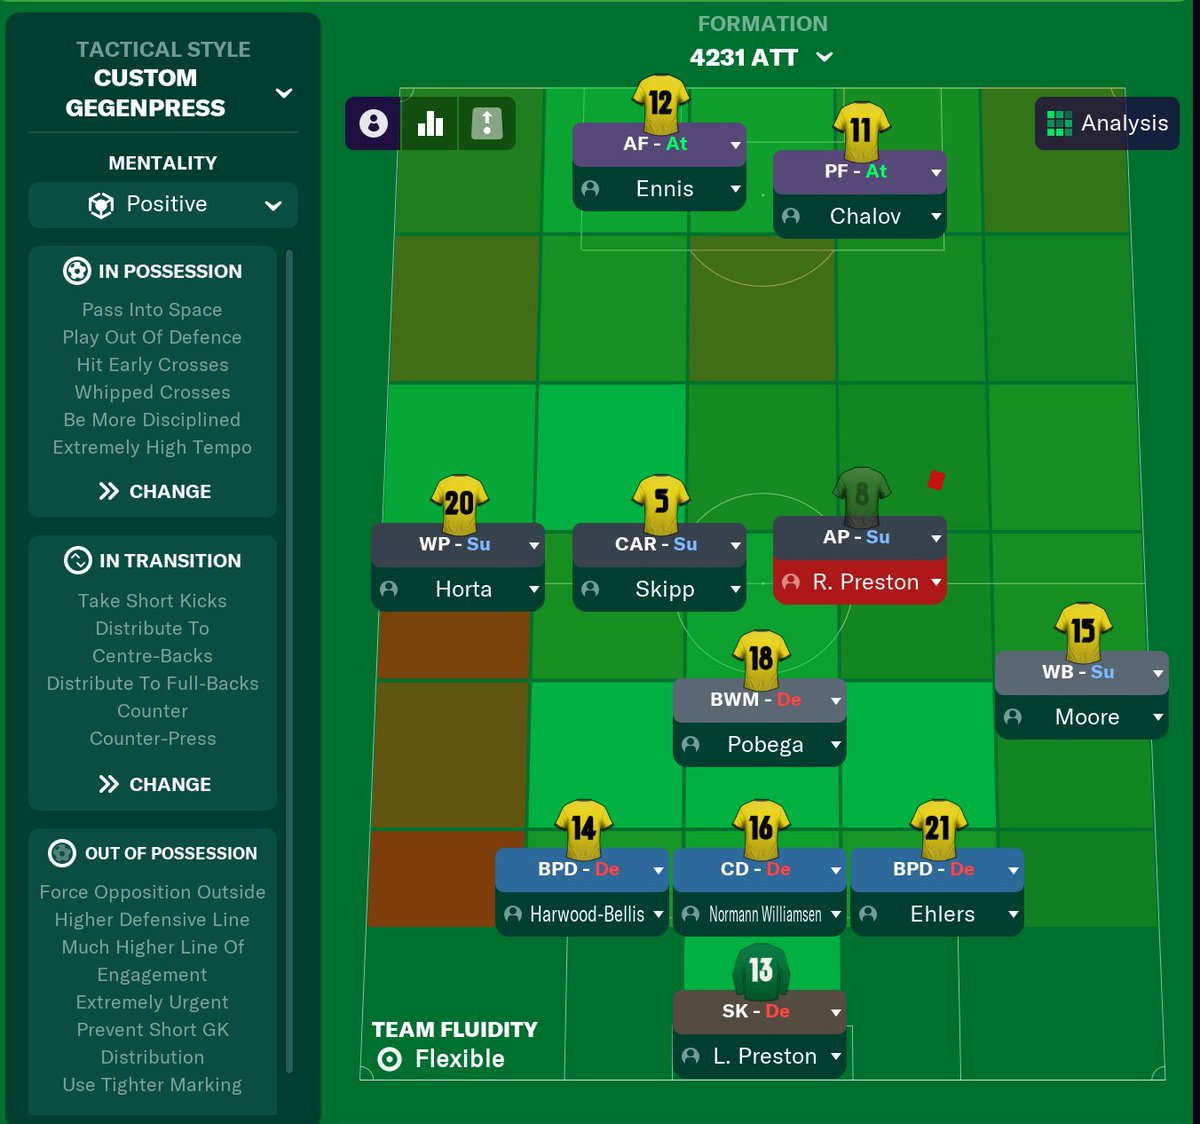 Second season in the Prem and I have finally settled on a nice and normal formation